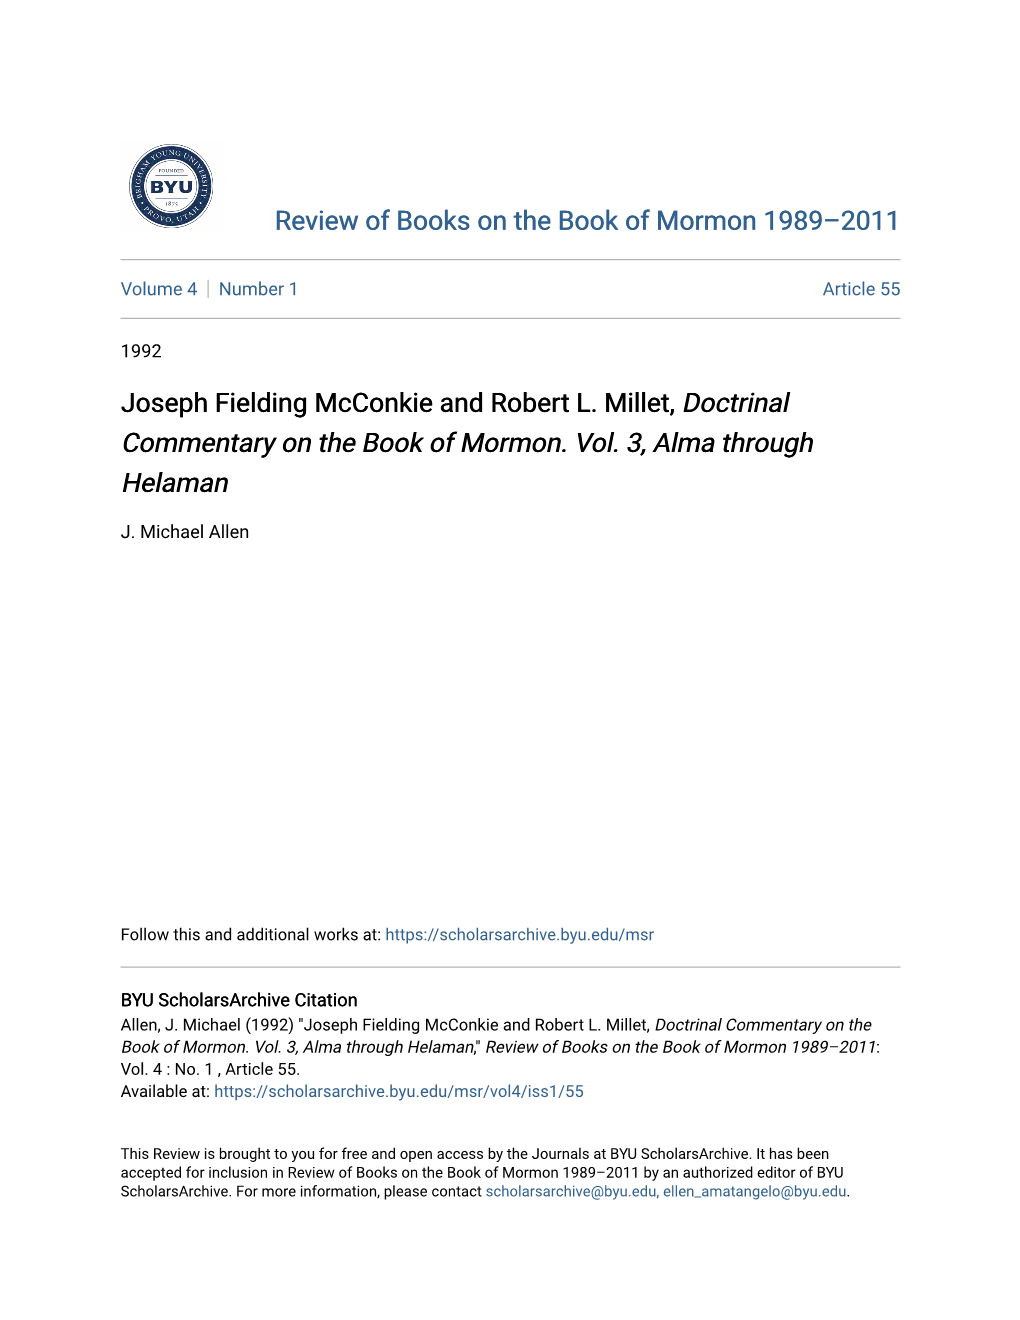 Joseph Fielding Mcconkie and Robert L. Millet, Doctrinal Commentary on the Book of Mormon